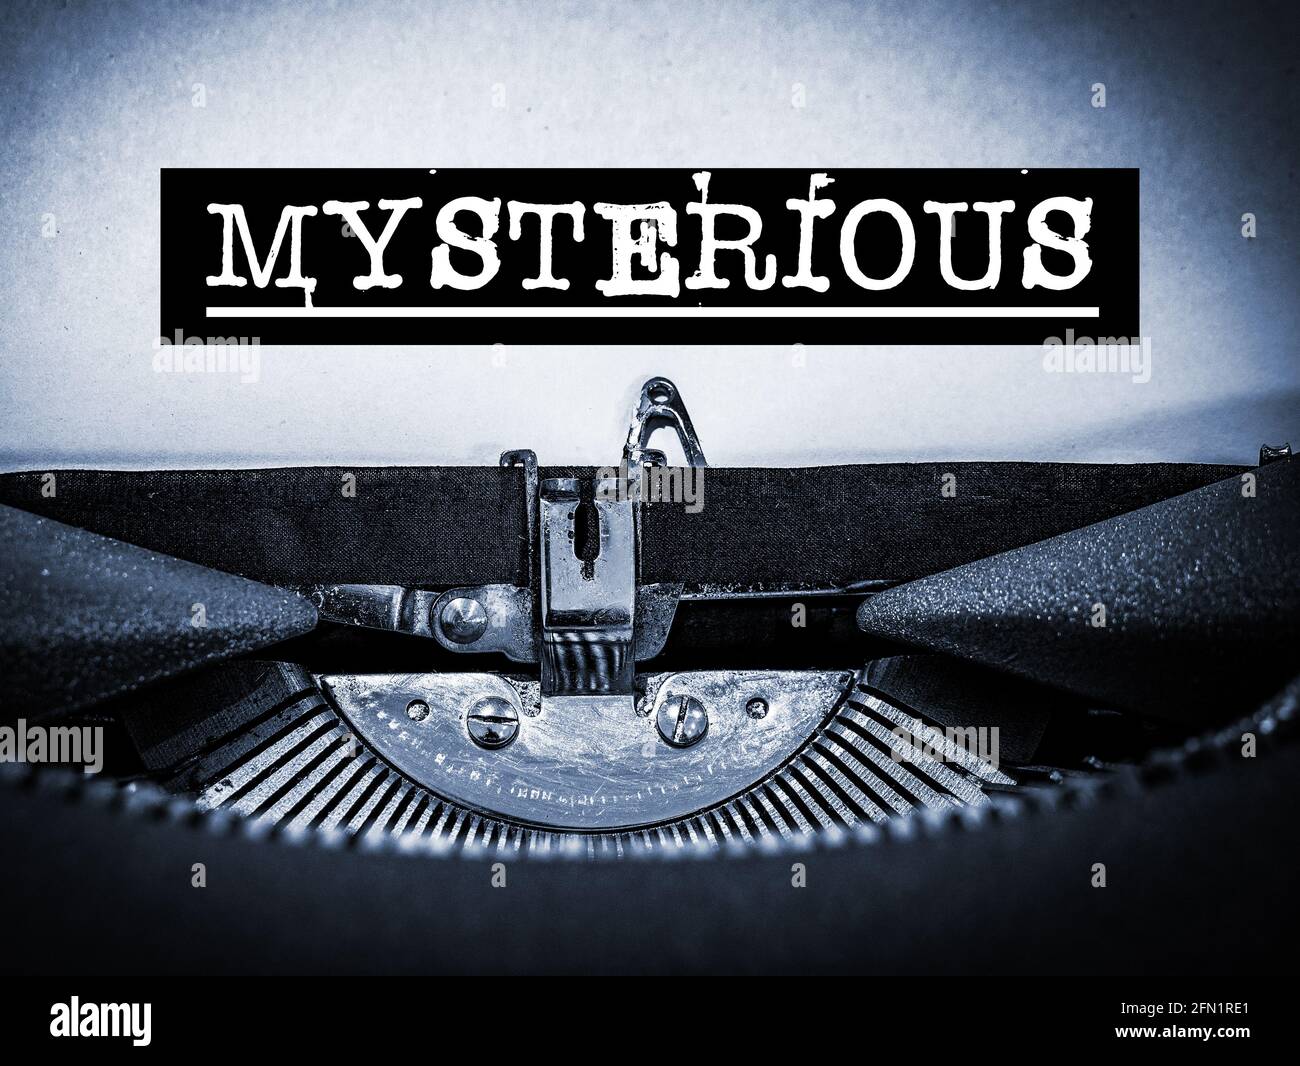 Mysterious displayed on a vintage typewriter with underline text and black border in a blue tone Stock Photo